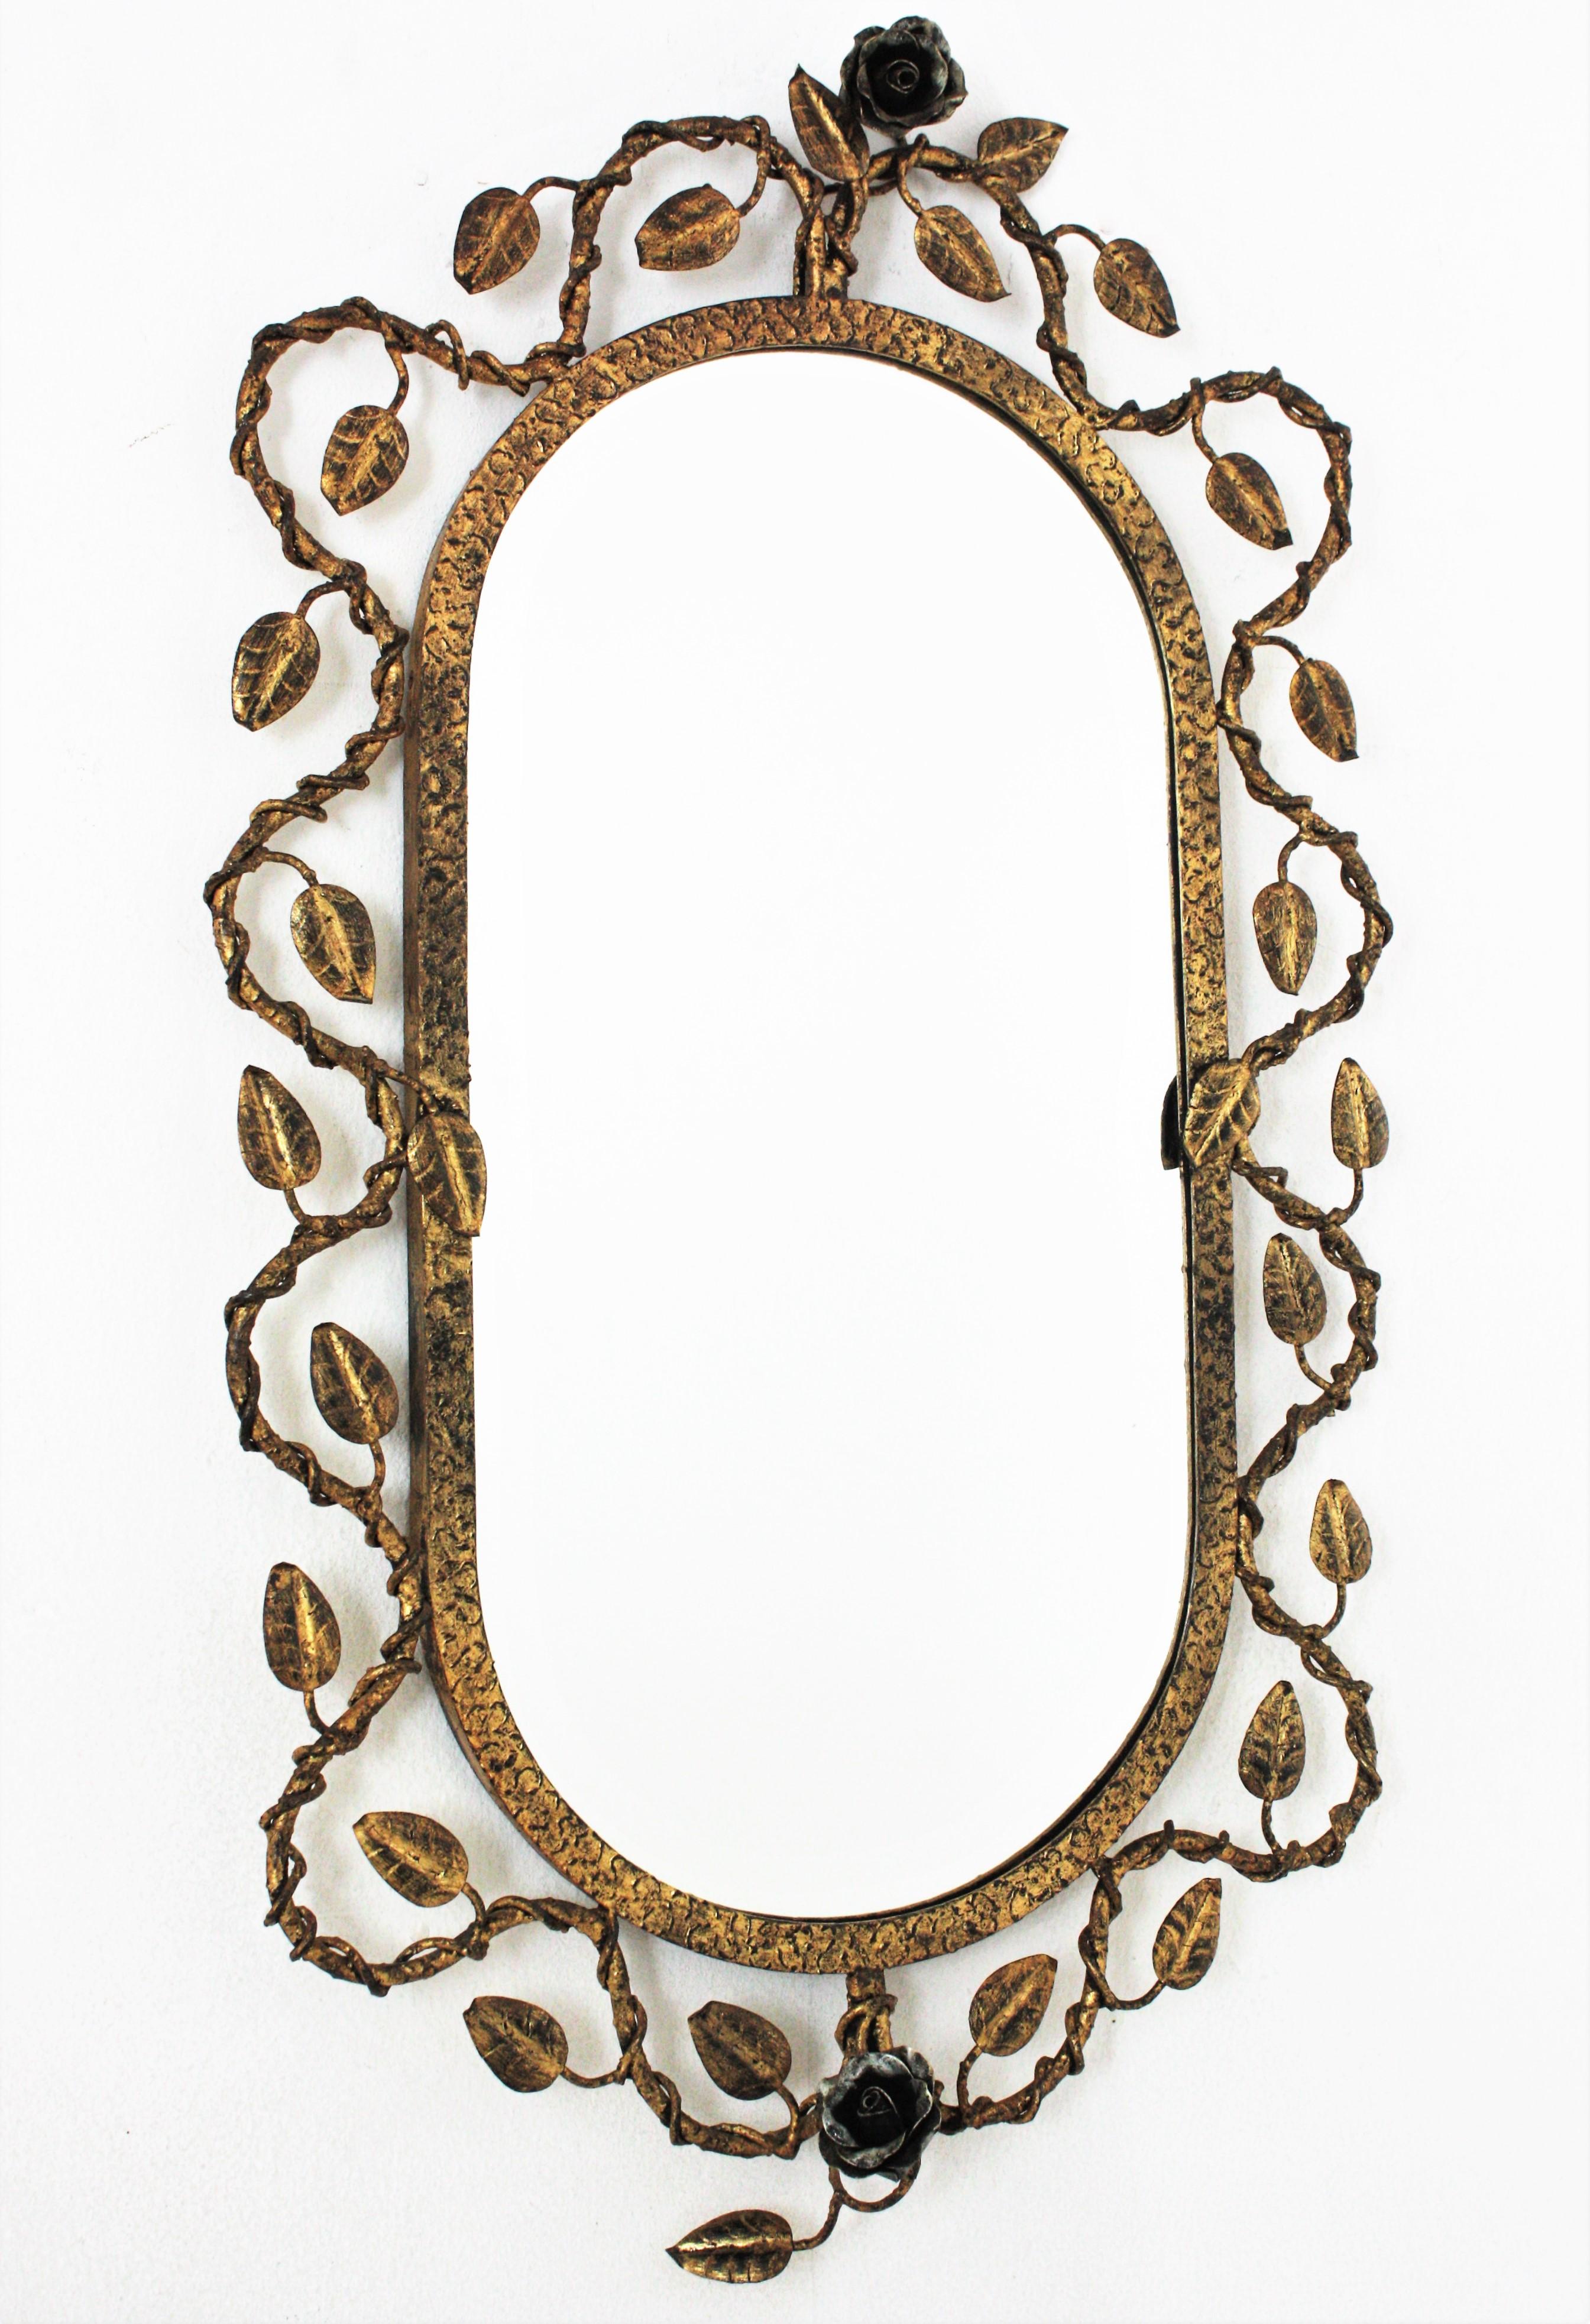 Foliage Floral Oval Mirror in Gilt Hand Forged Iron, Spain, 1950s.
Hand wrought iron oval sunburst wall mirror with foliage frame , gilded finish and floral accents in silvered iron. 
The frame features and intrincate of branches and leaves with